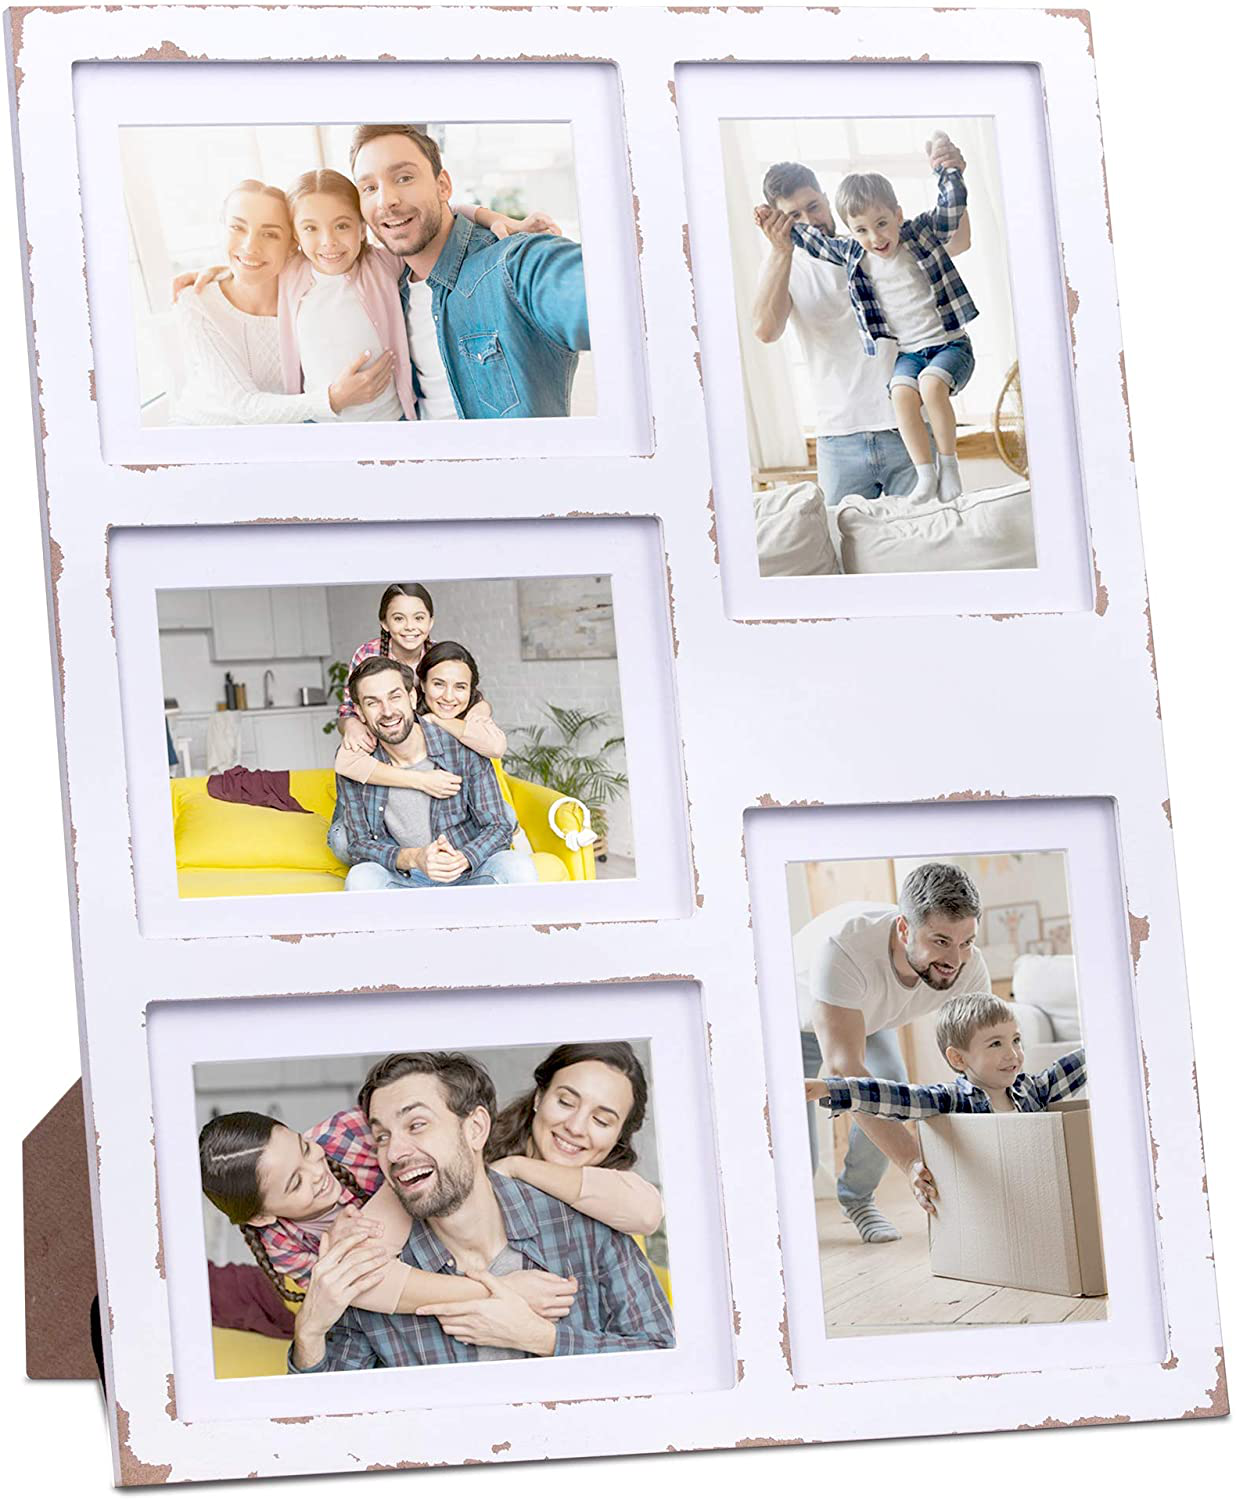 GLM Collage Picture Frames for 4x6 and 5x7 Photos with Glass and Mat, Photo Frame Collage for Wall Holds Five 4x6 Or 5x7 Photos - Picture Frames Collage Rustic Distressed (Gray)